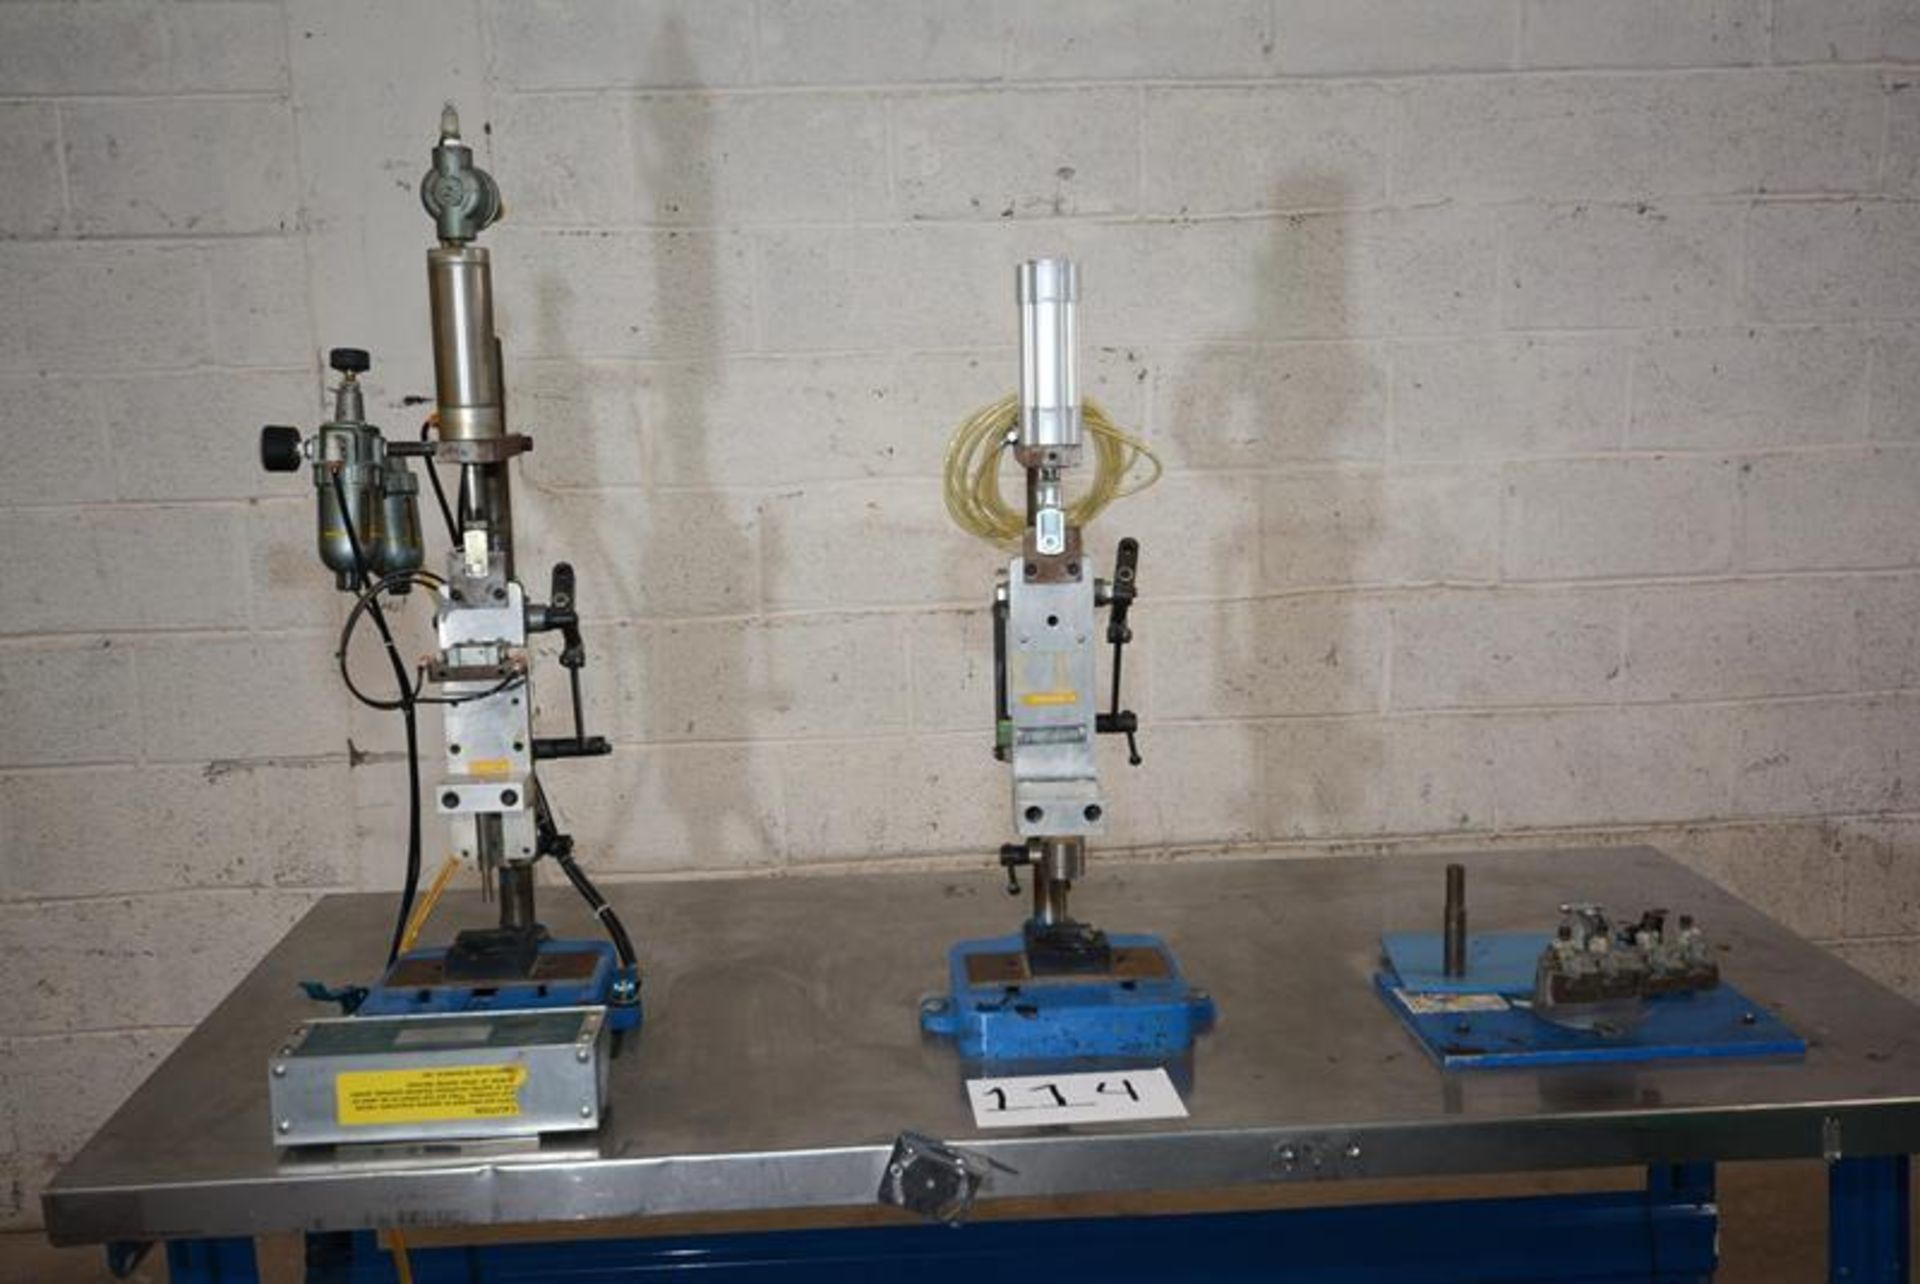 Workstation with two press. Brand: N/A. Model: N/A. Year: N/A. Serial Number: N/A. Possible Uses: